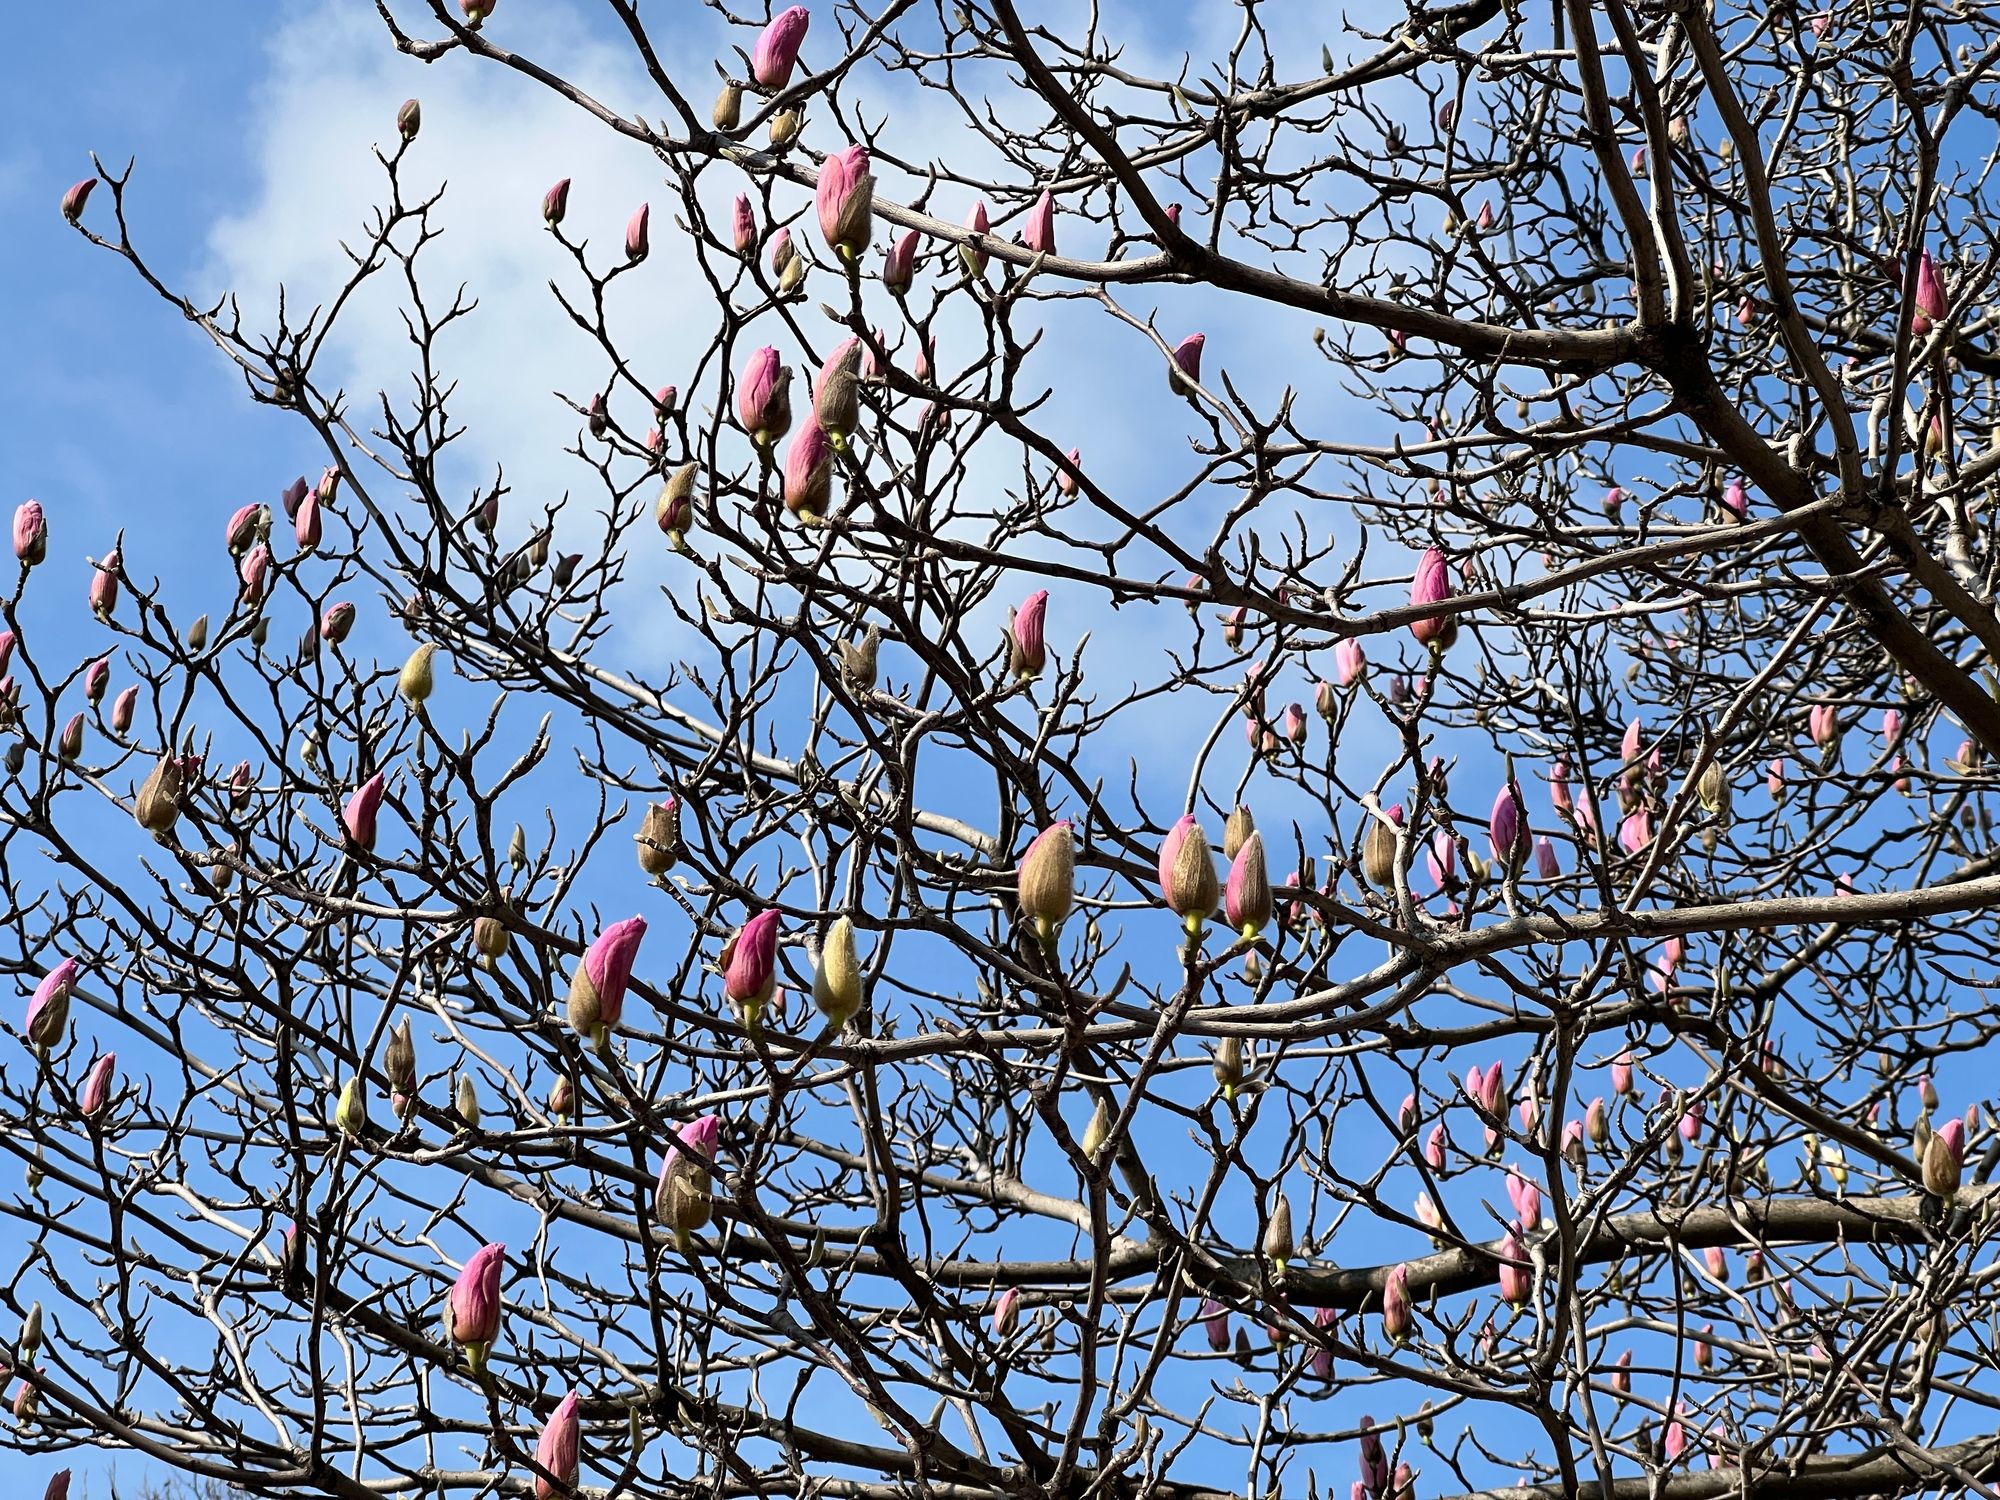 The branches of a magnolia tree against a blue sky, with pink buds getting ready to blossom.